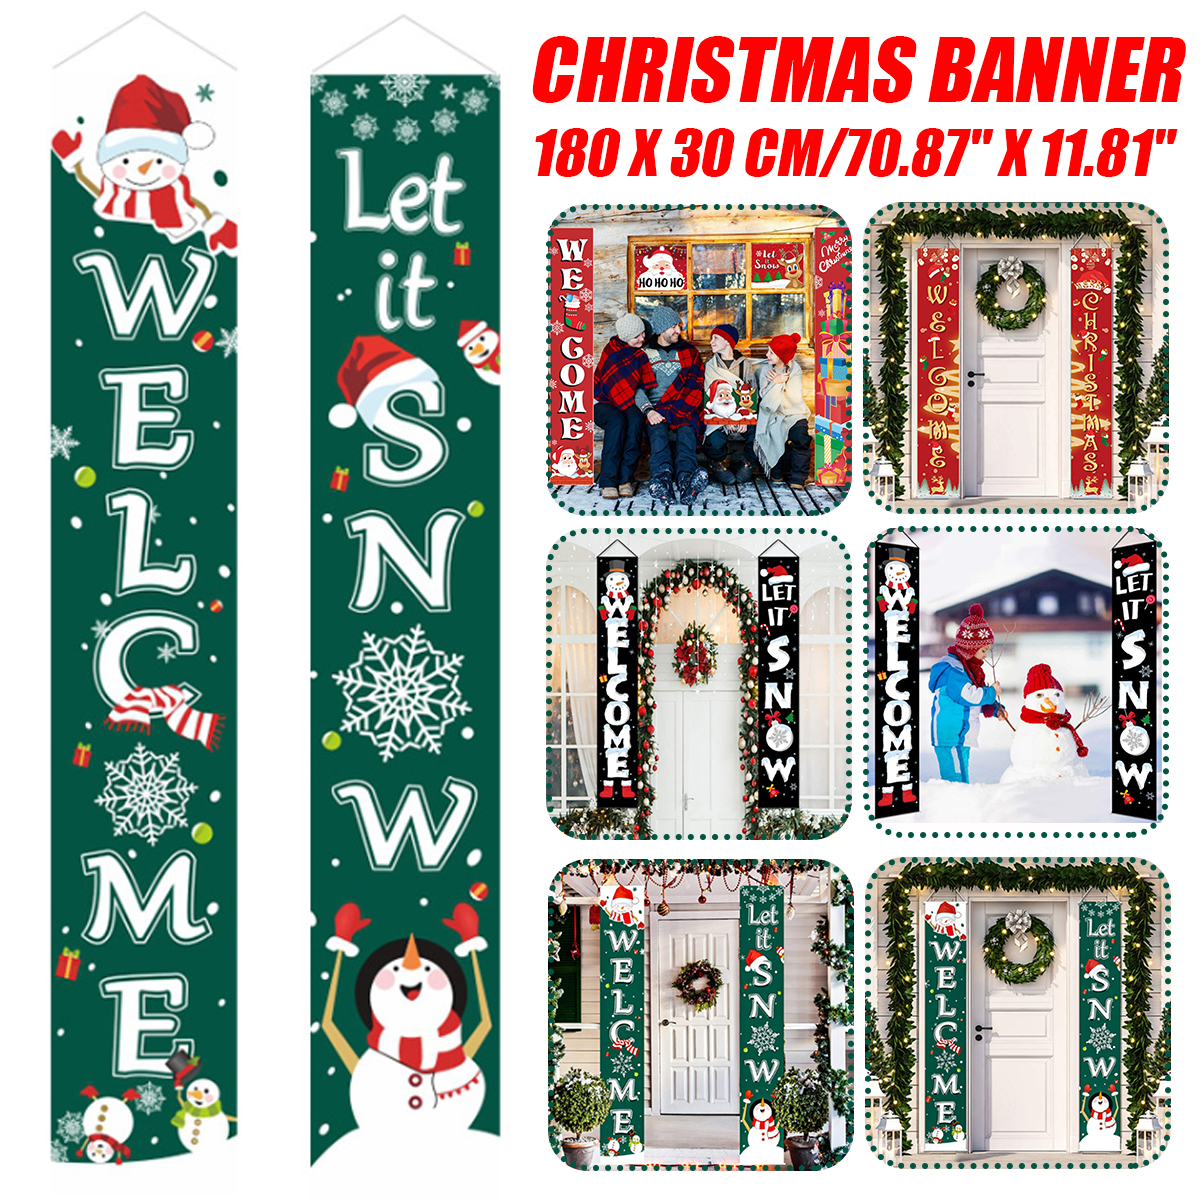 Merry-Christmas-Porch-Banner-Xmas-Outdoor-Decoration-Couplet-Hanging-Cloth-Door-Hanging-Ornaments-fo-1785753-1